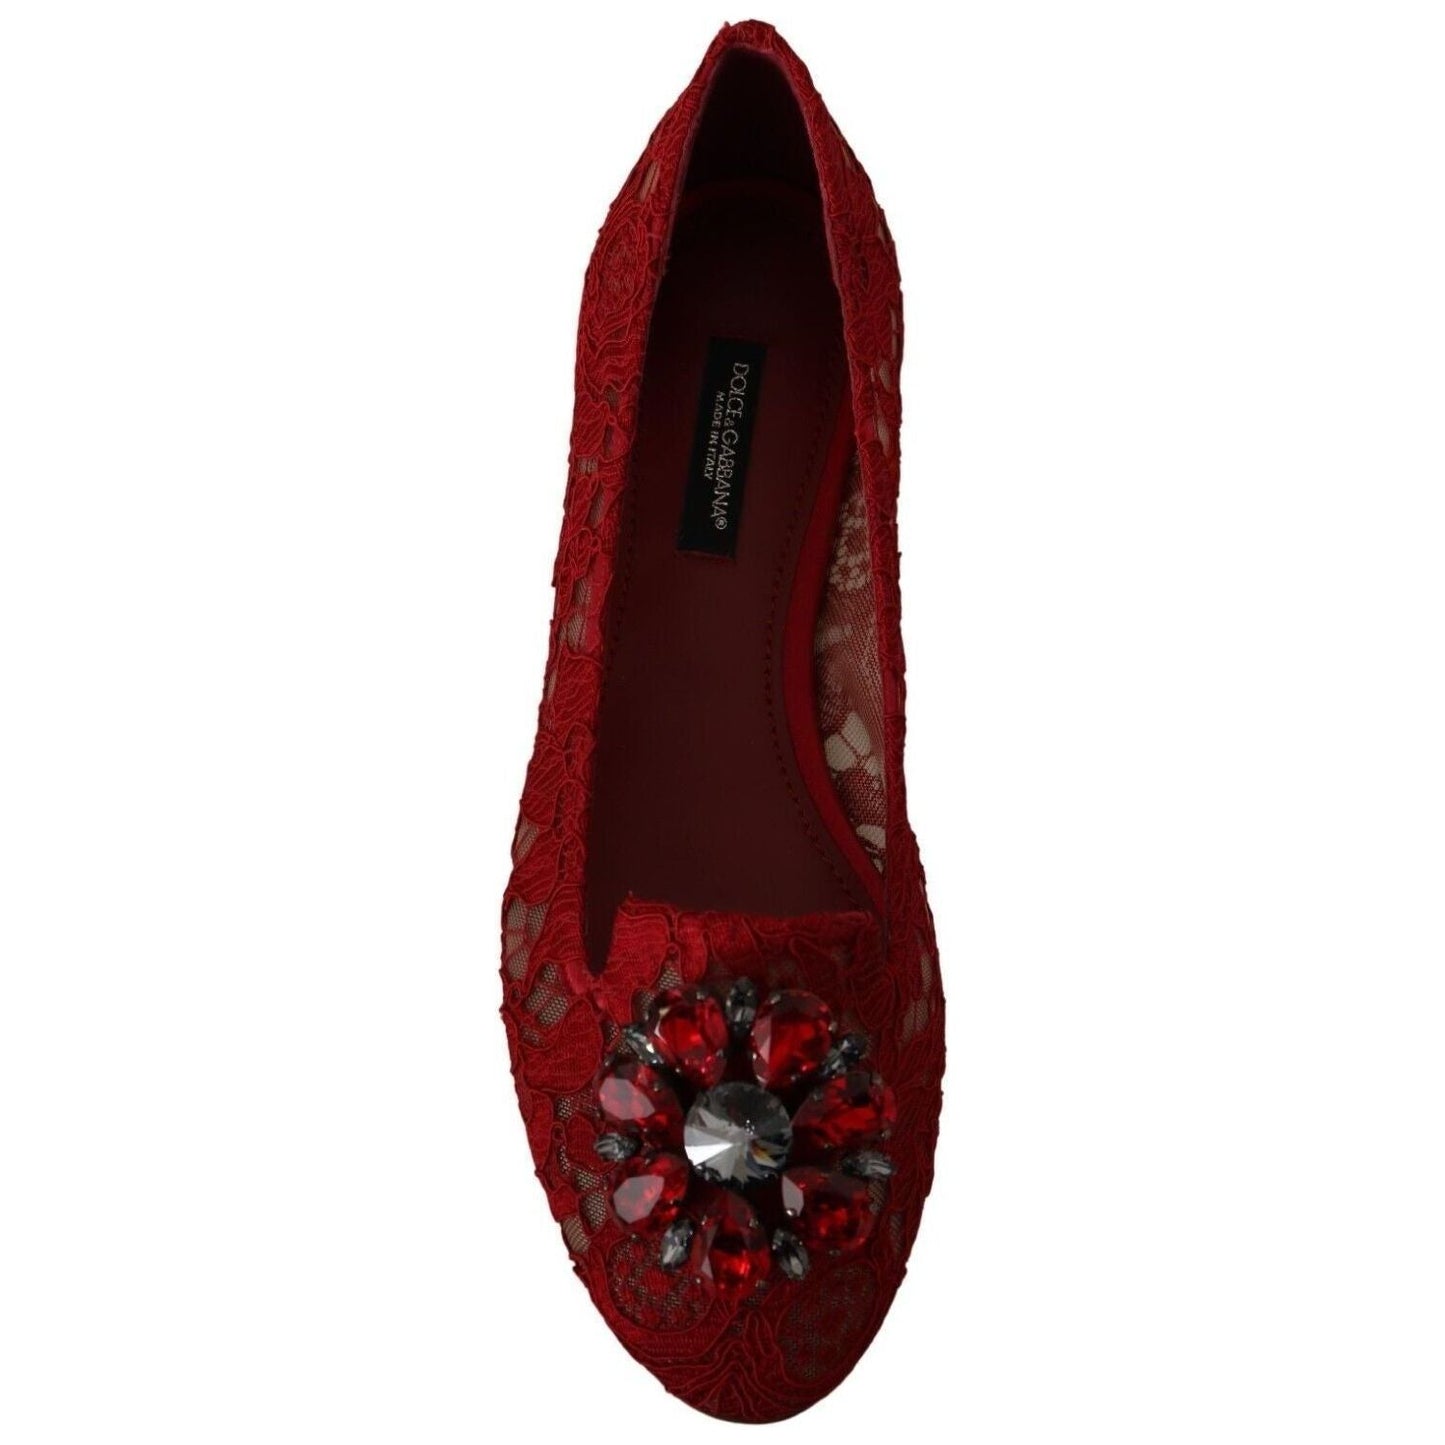 Dolce & Gabbana Radiant Red Lace Ballet Flats with Crystal Buckle red-lace-crystal-ballet-flats-loafers-shoes s-l1600-13-31-59f1a724-74c.jpg